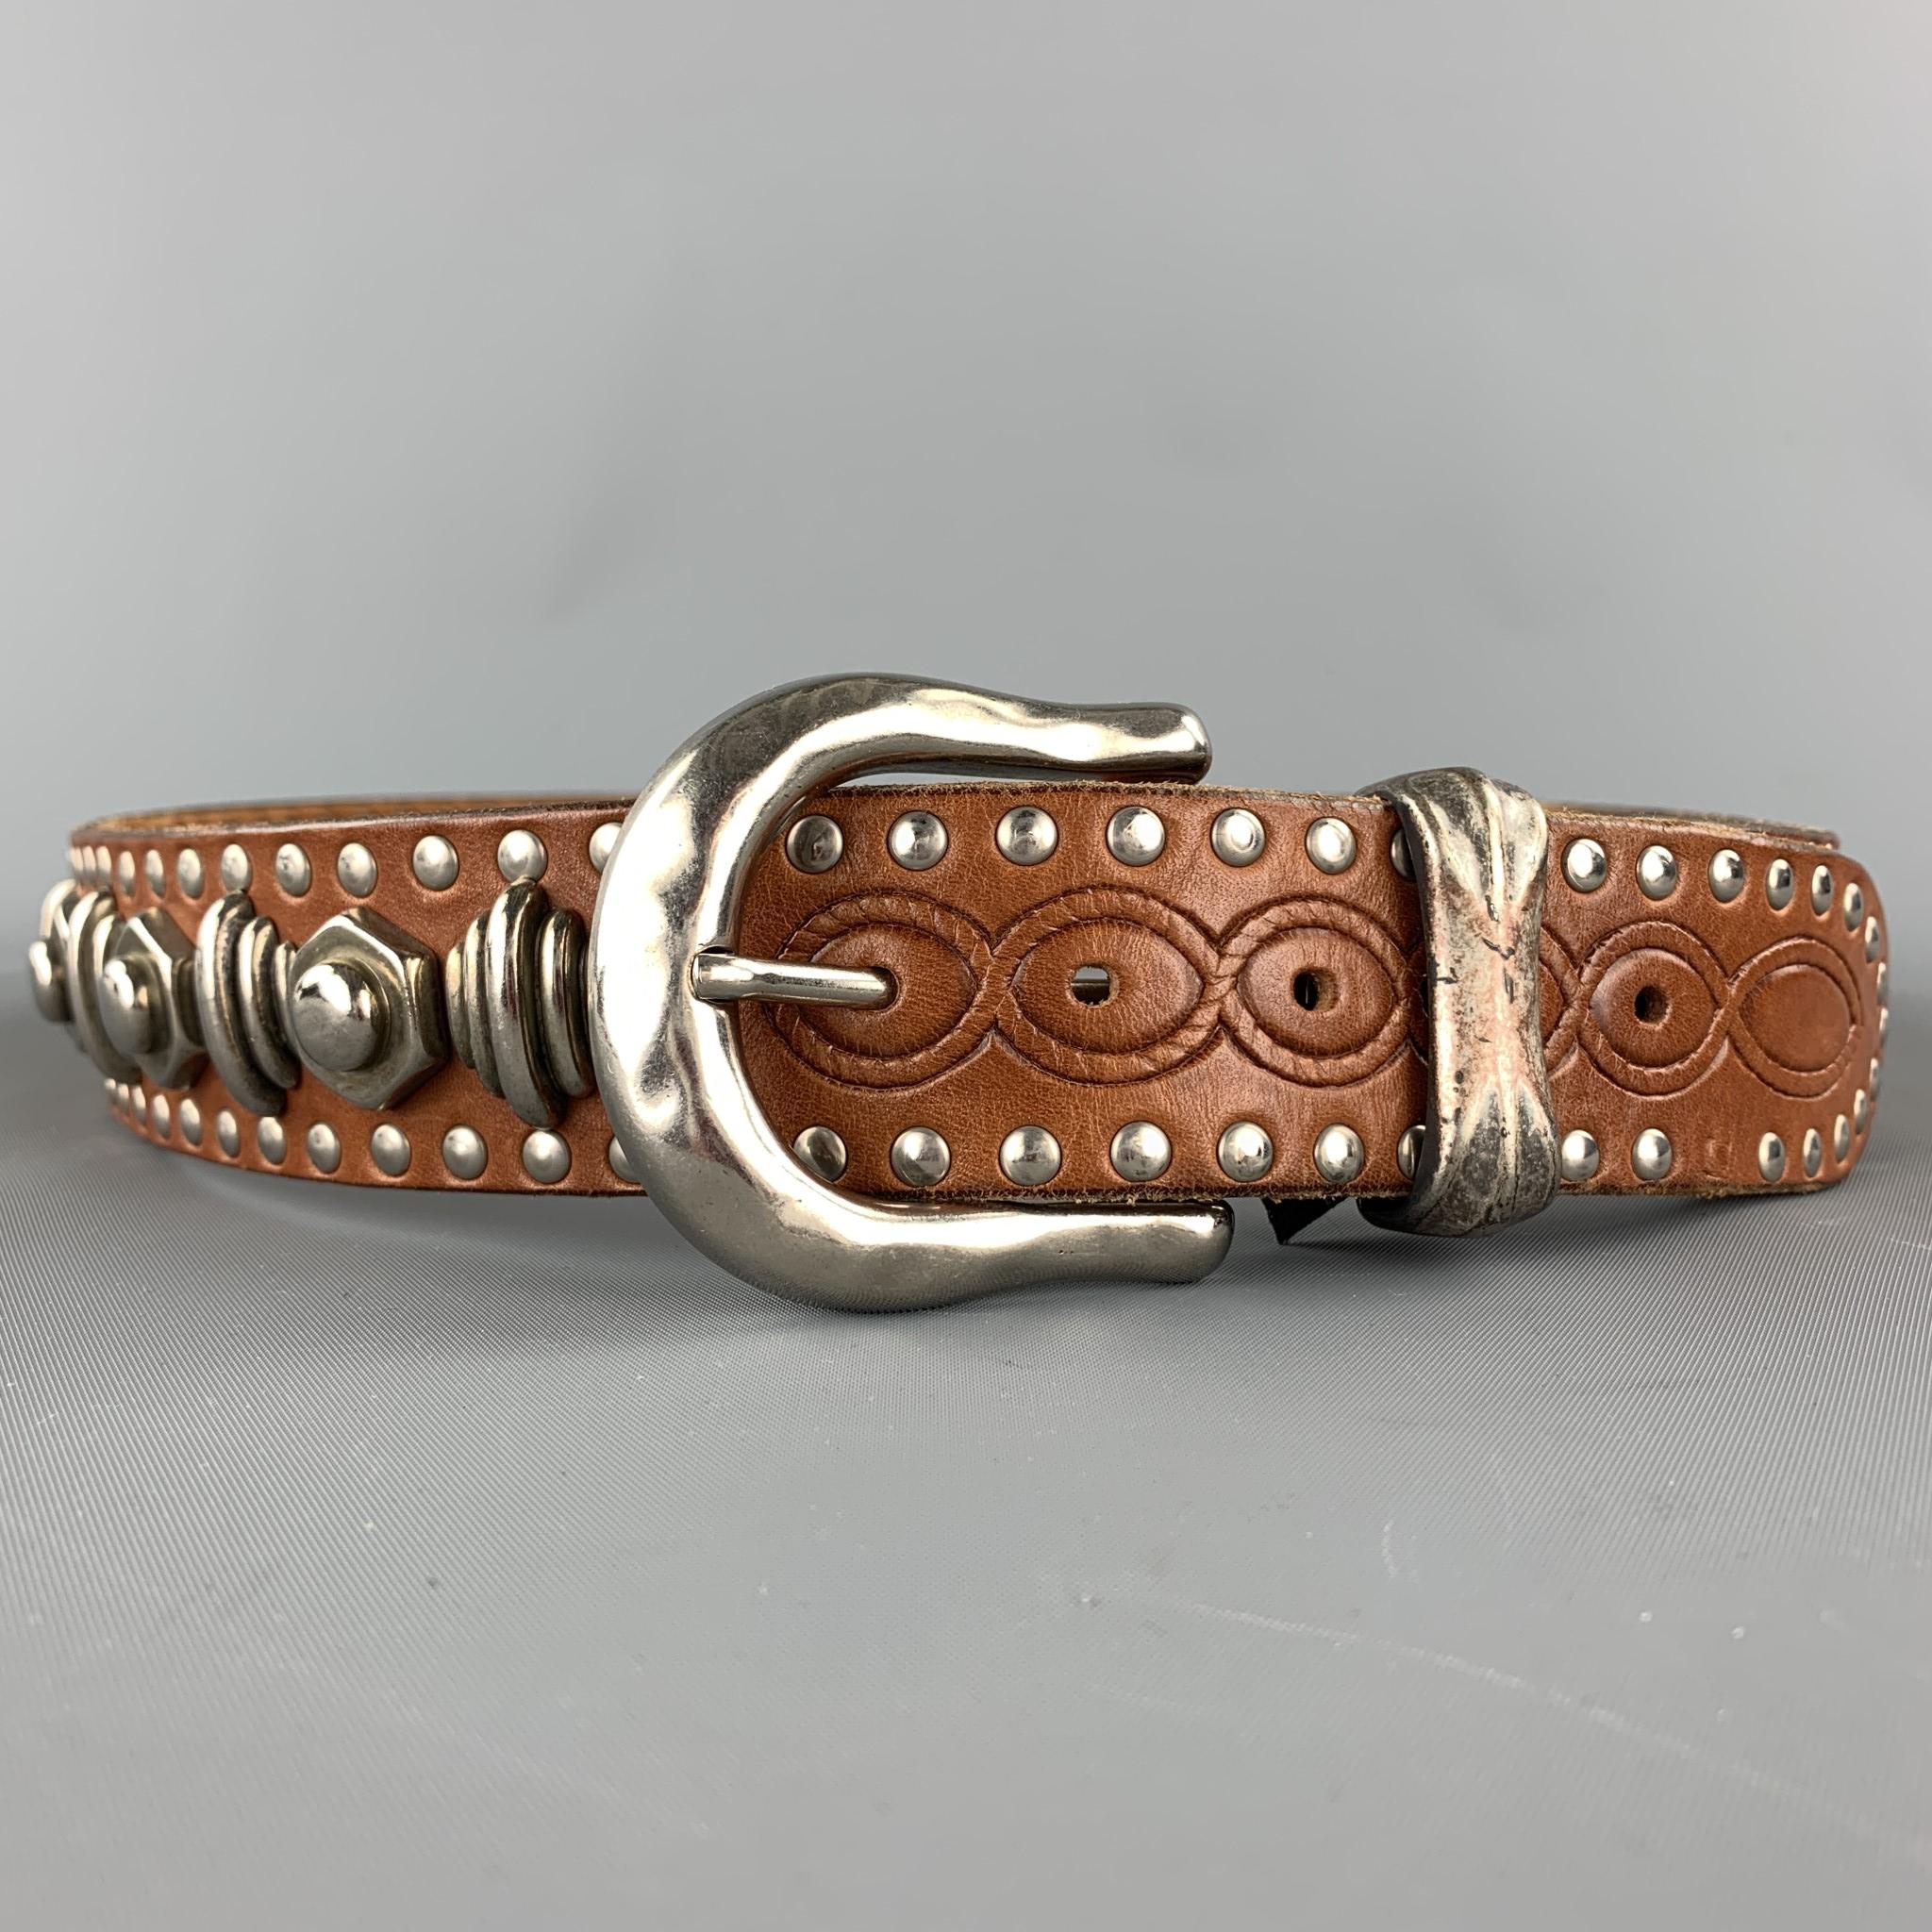 NANNI belt comes in  tan leather with silver tone metal designs throughout featuring studded details and a buckle closure. Made in Italy.

Ver Good Pre-Owned Condition.
Marked: 90/36

Length:40.5 in. 
Width: 1.5 in.
Fits: 33 in. - 36 in. 
Buckle: 2